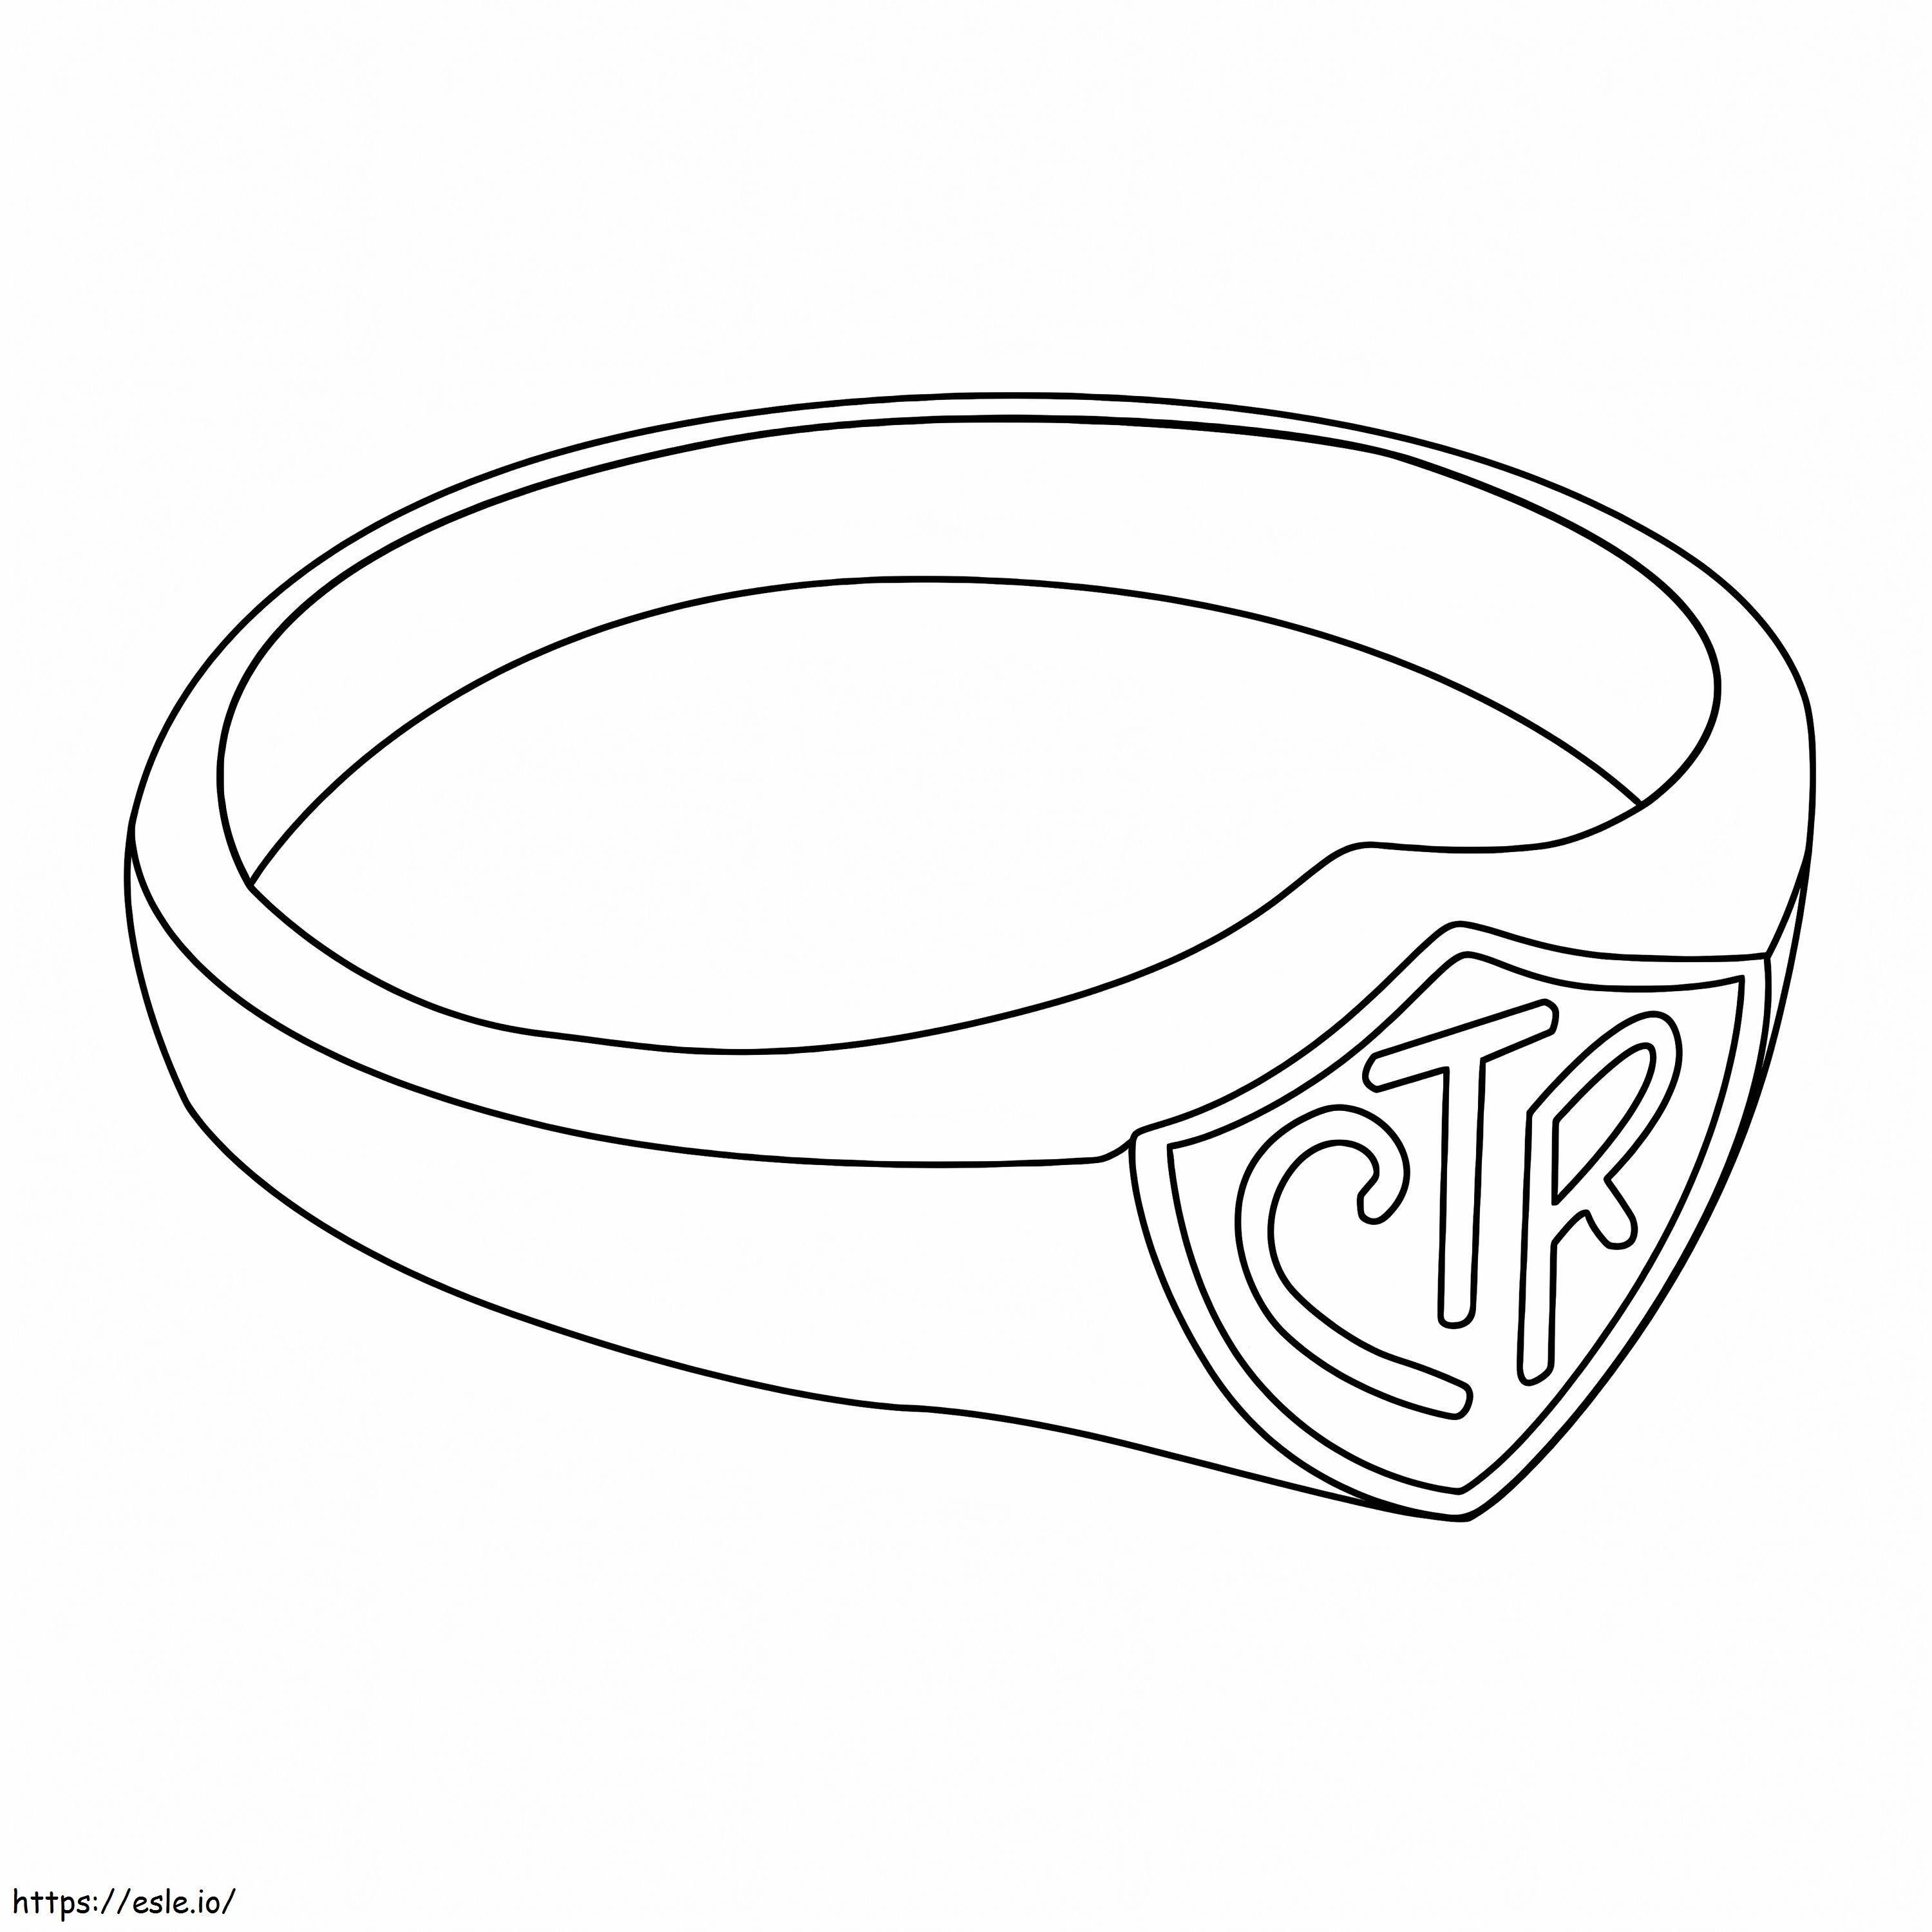 Unique CTR Ring coloring page